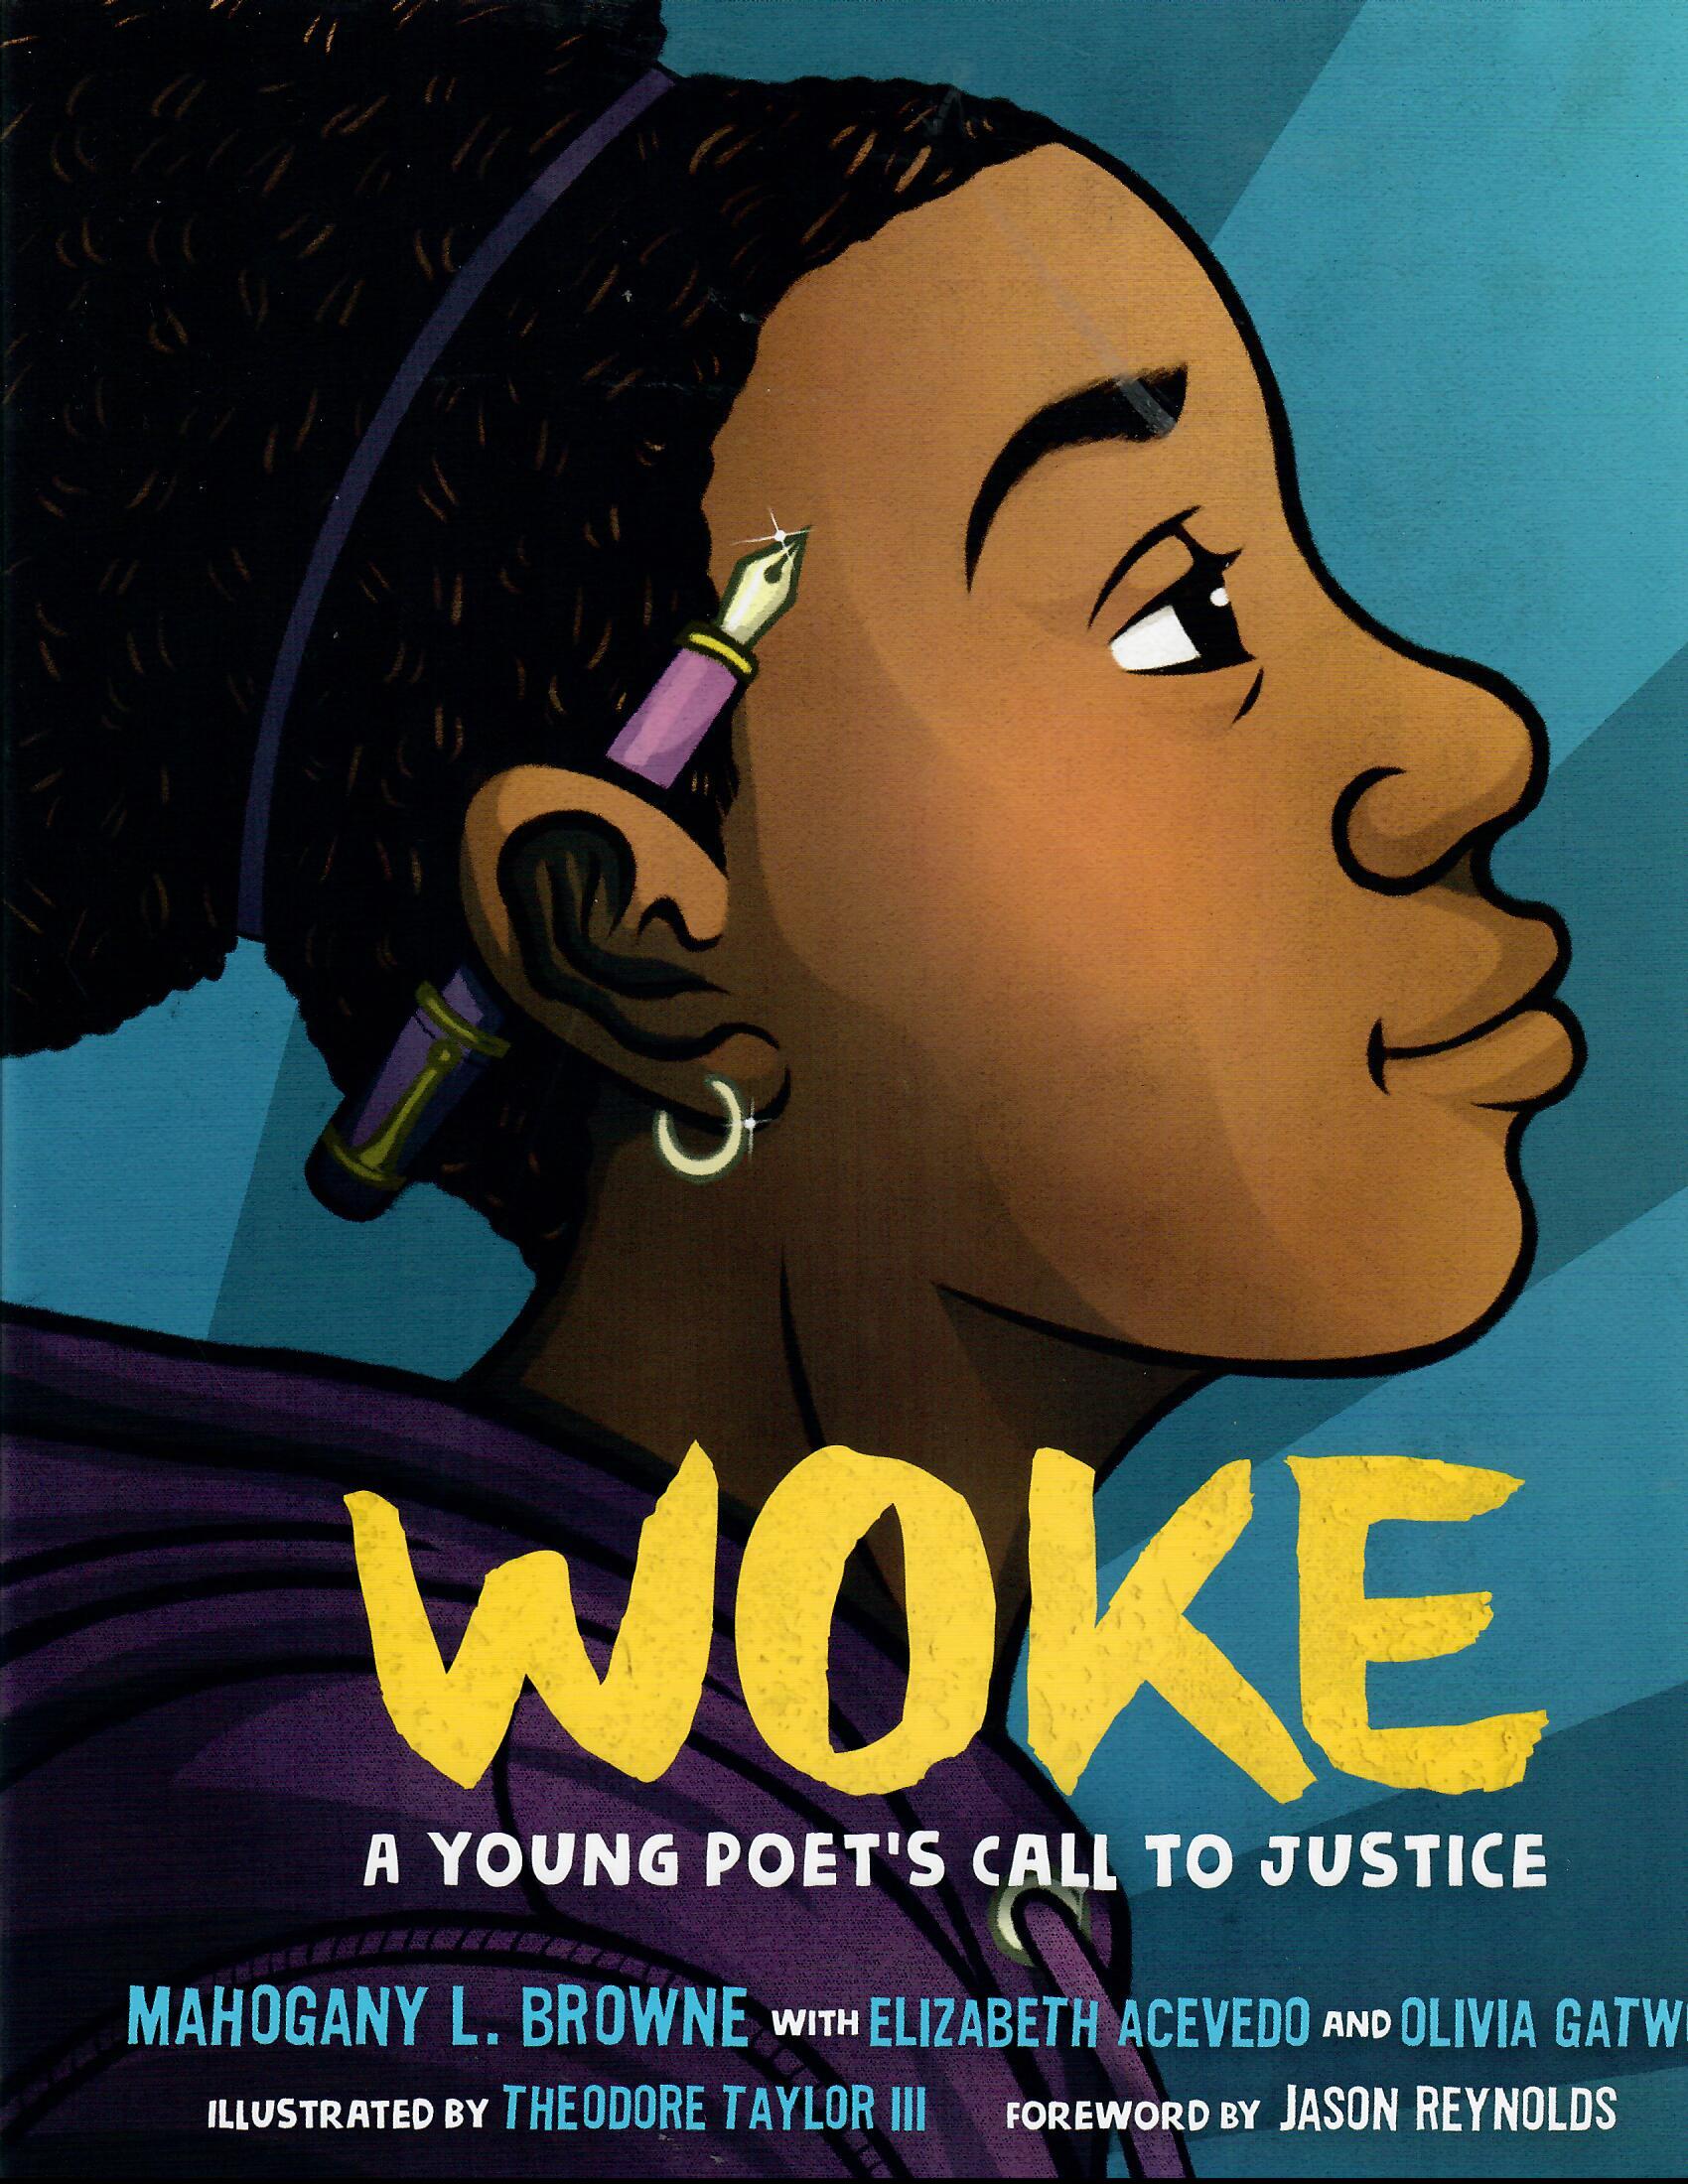 Book jacket of Woke: A Young Poet's Call to Justice by Mahogany L. Browne